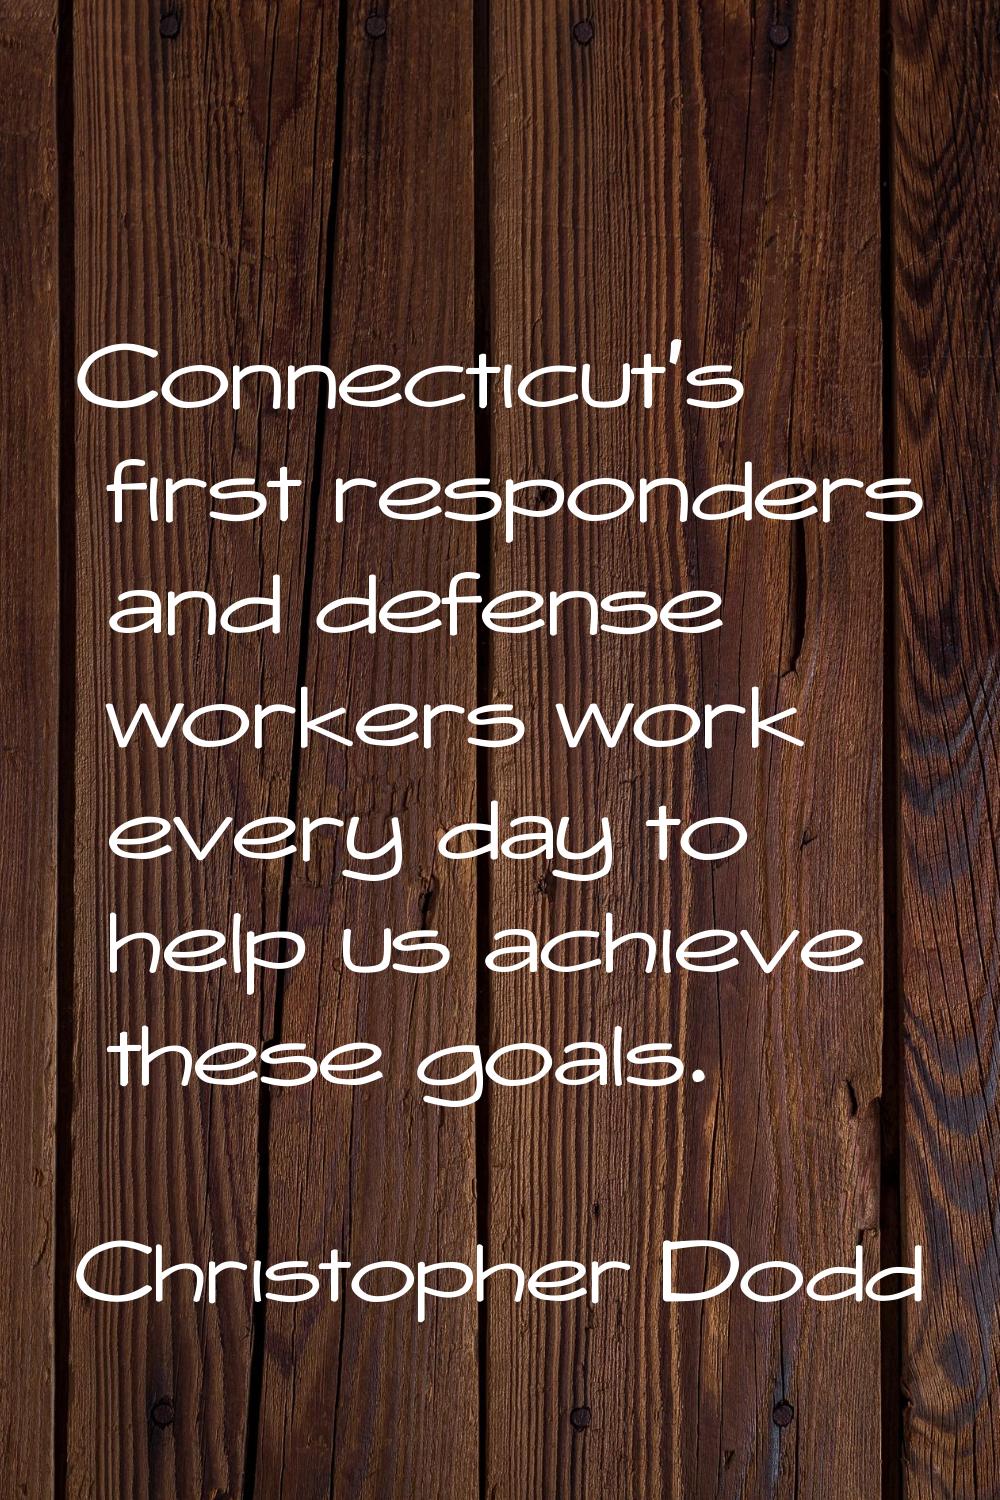 Connecticut's first responders and defense workers work every day to help us achieve these goals.